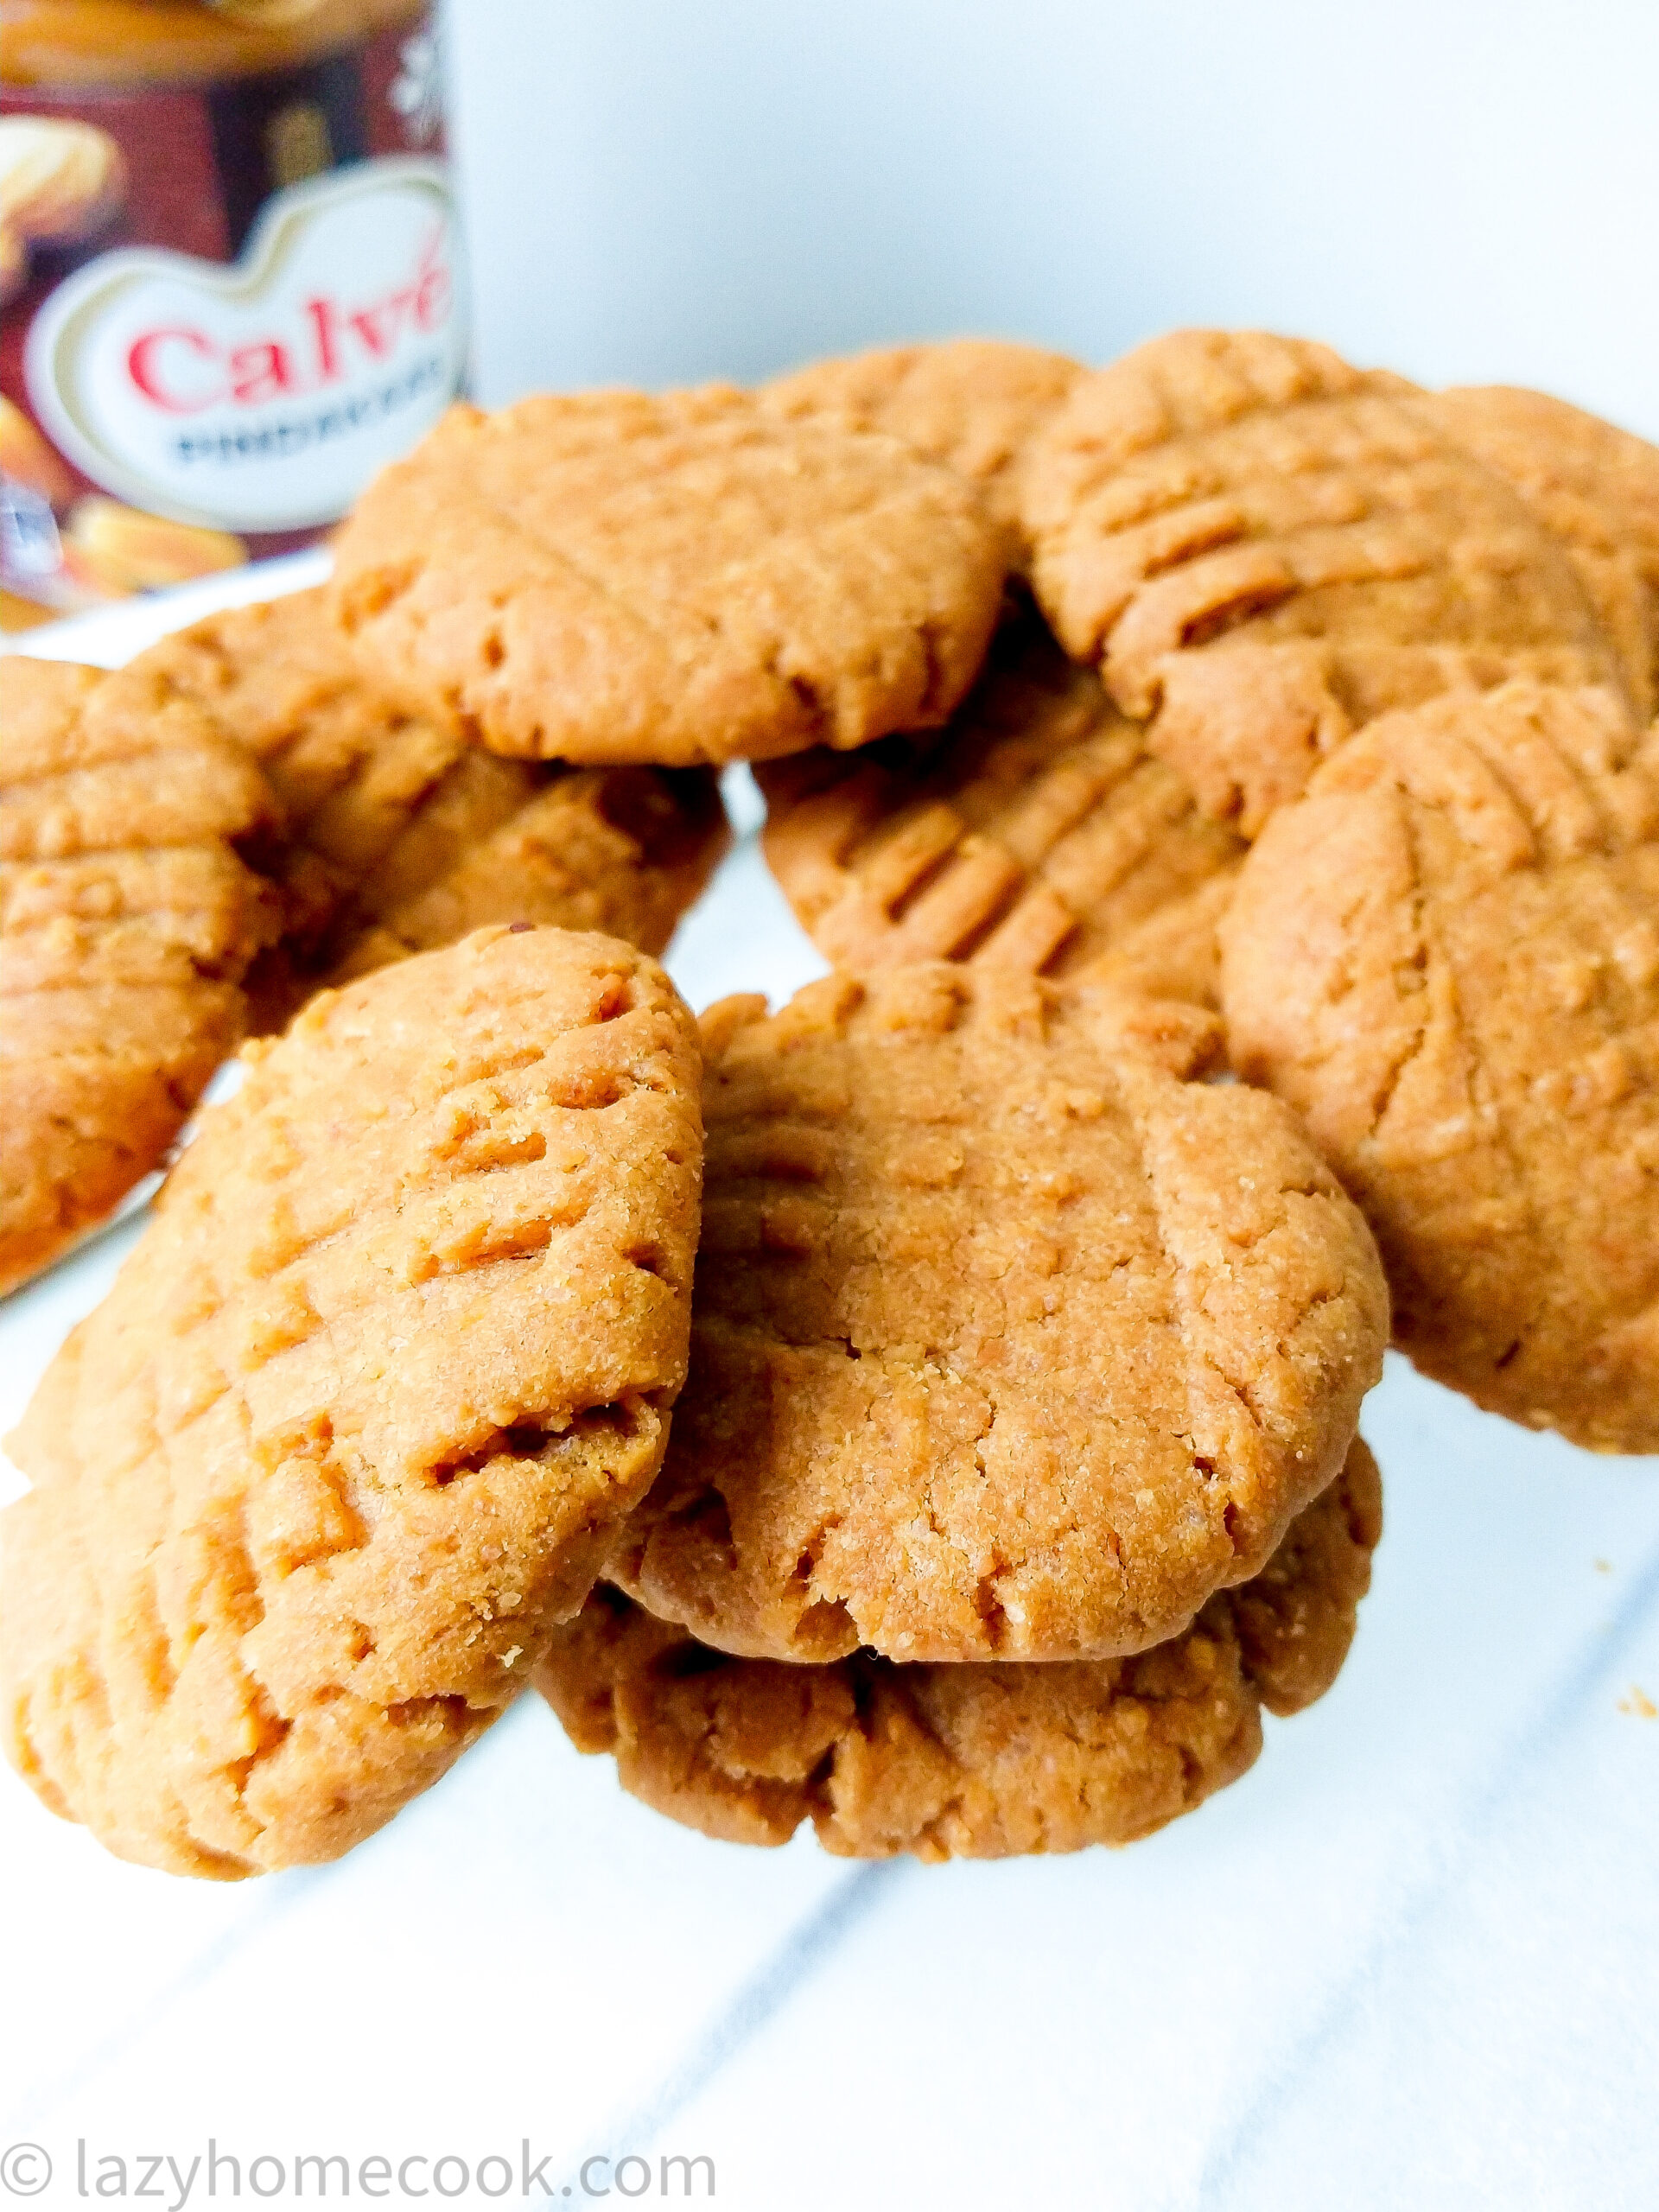 Peanut butter cookies with shredded coconut